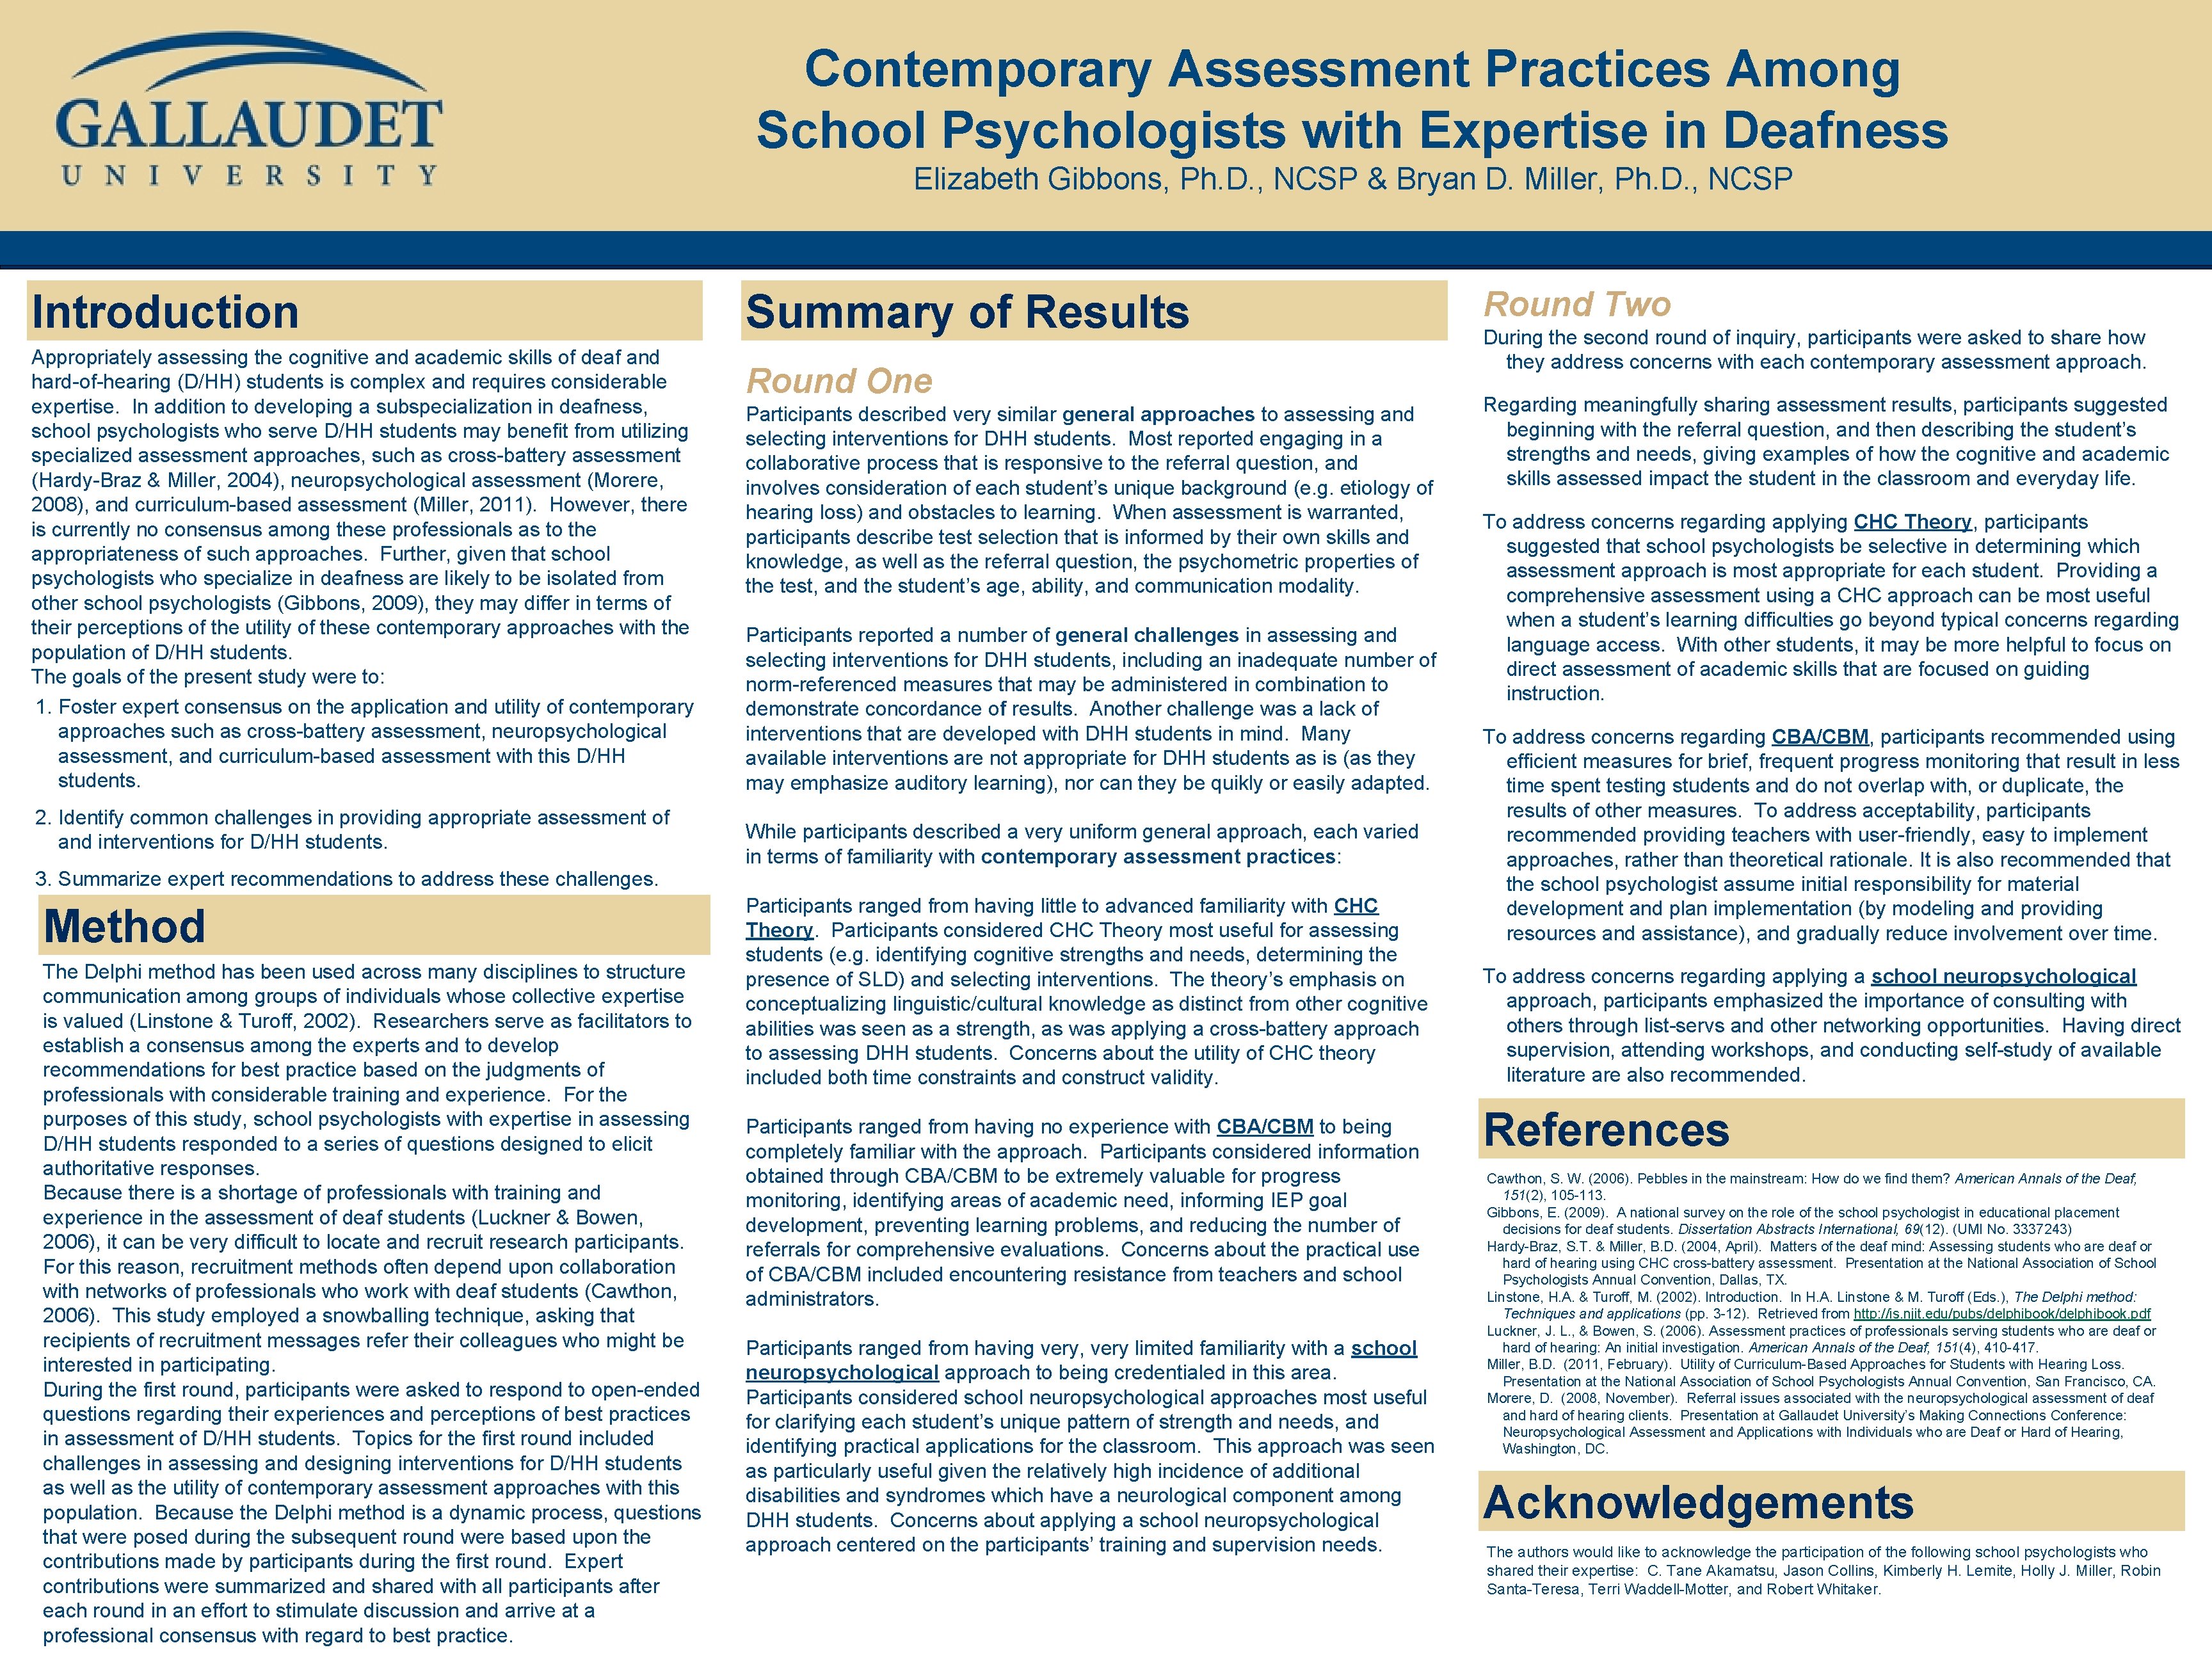 Contemporary Assessment Practices Among School Contemporary Assessment Practices Among Psychologists with Expertisewith in Deafness